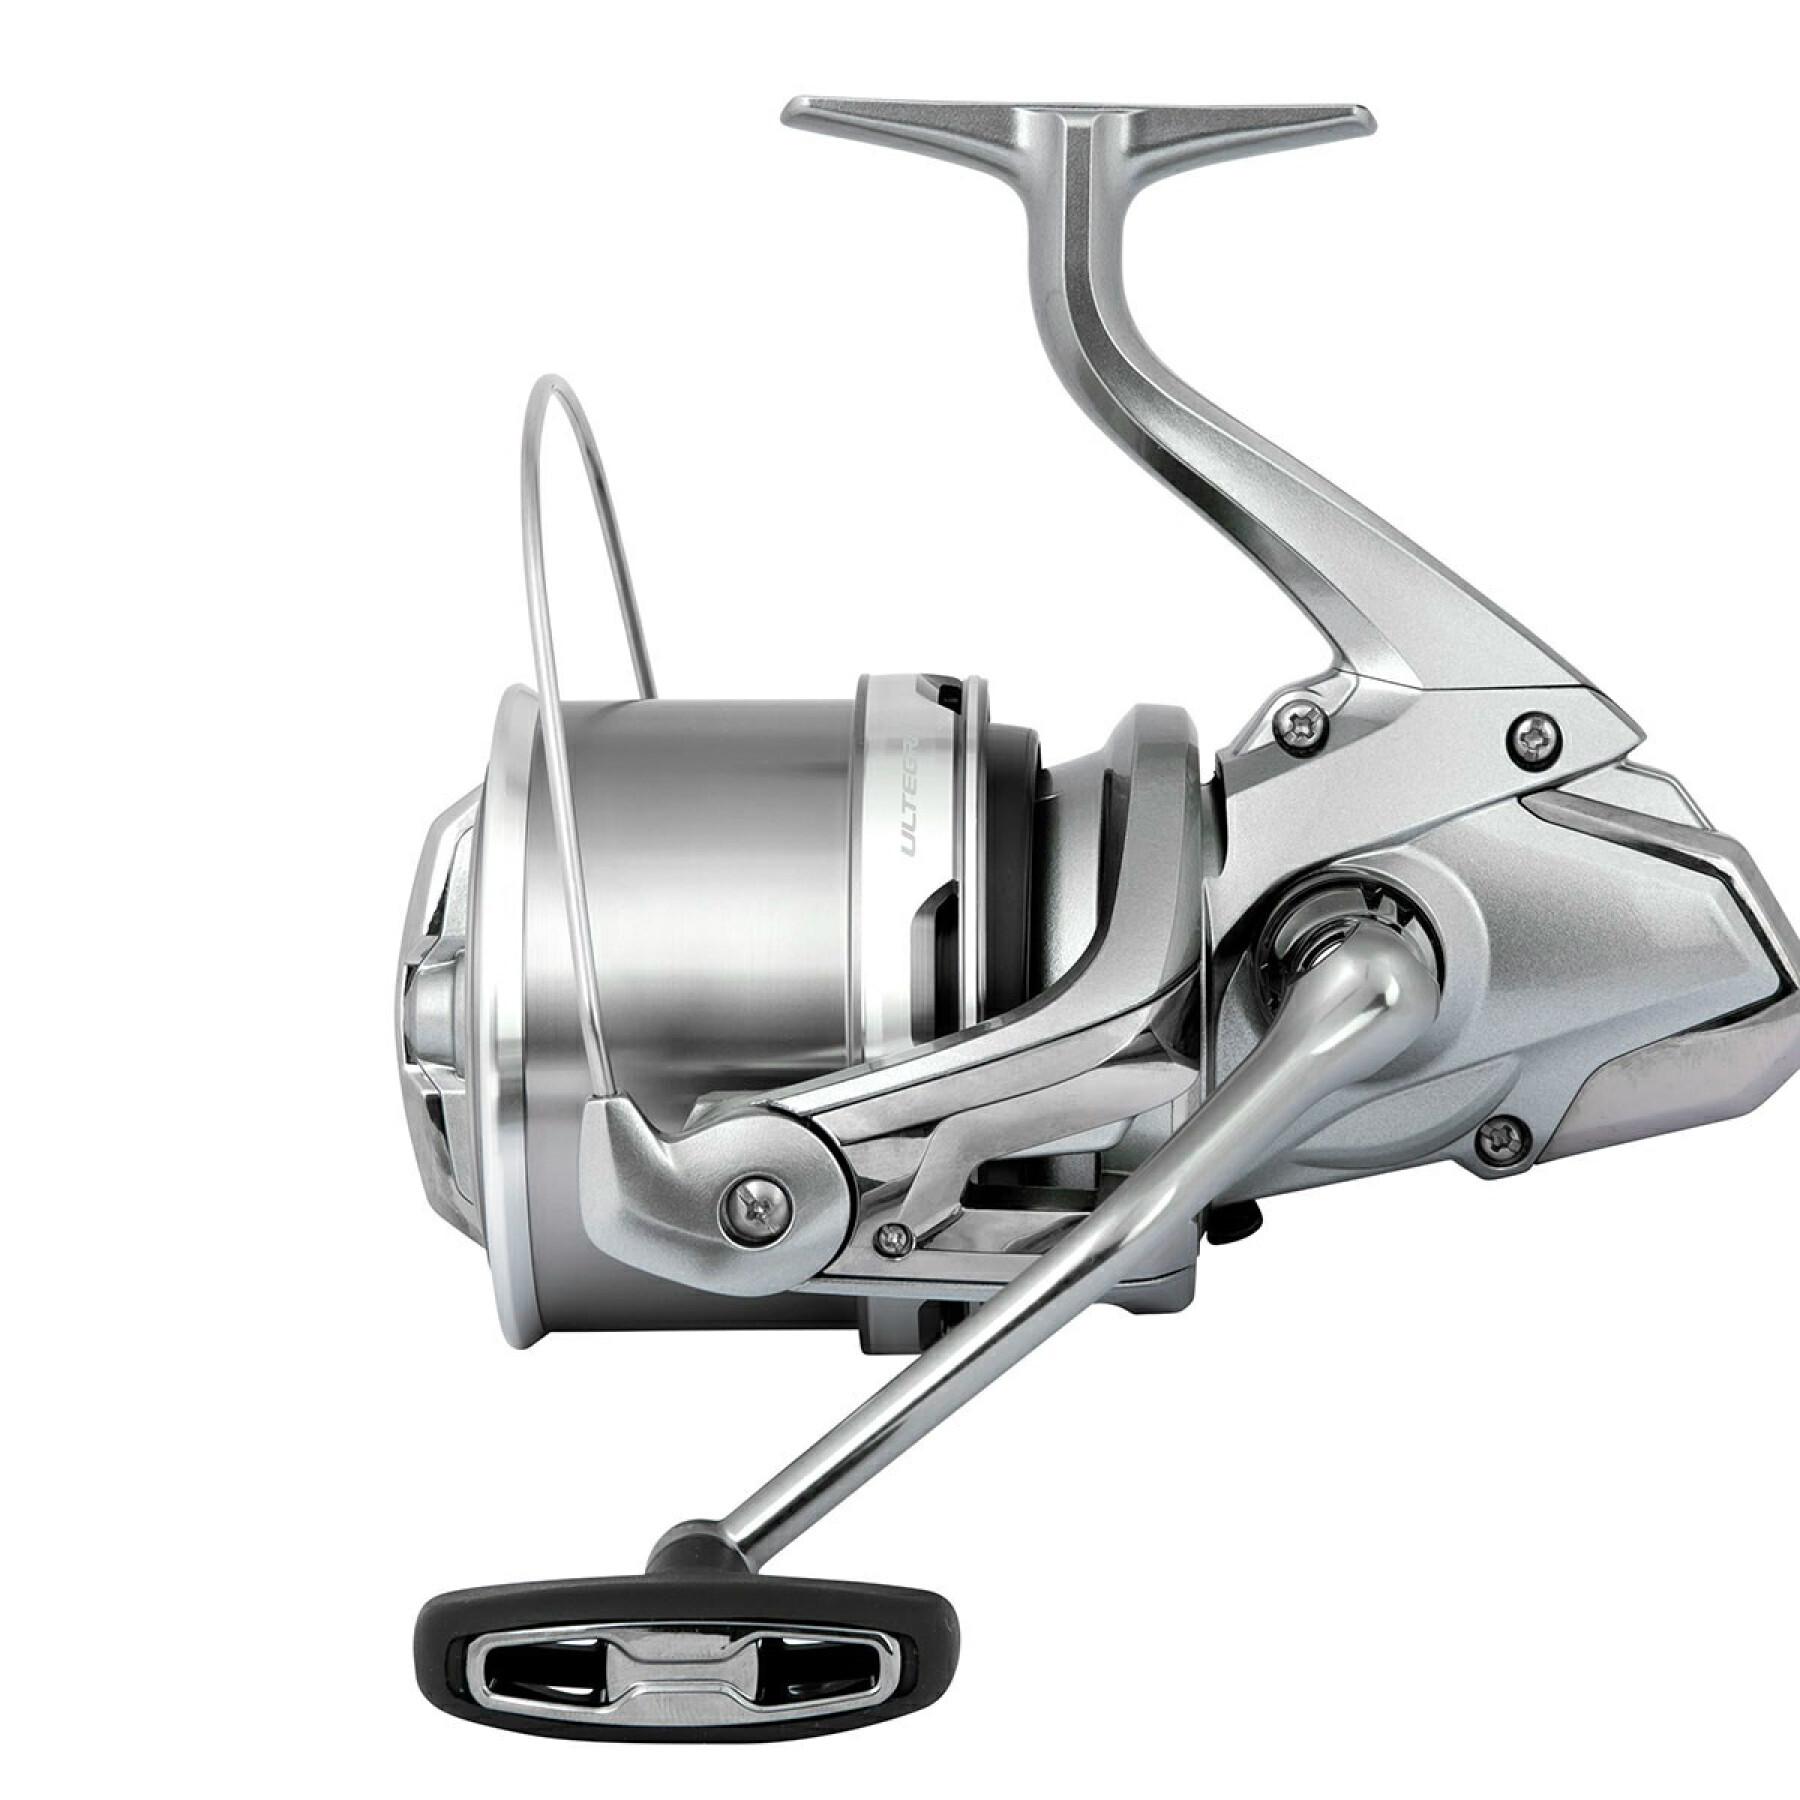 Front brake reel Shimano Ultegra XSE 3500 Competition